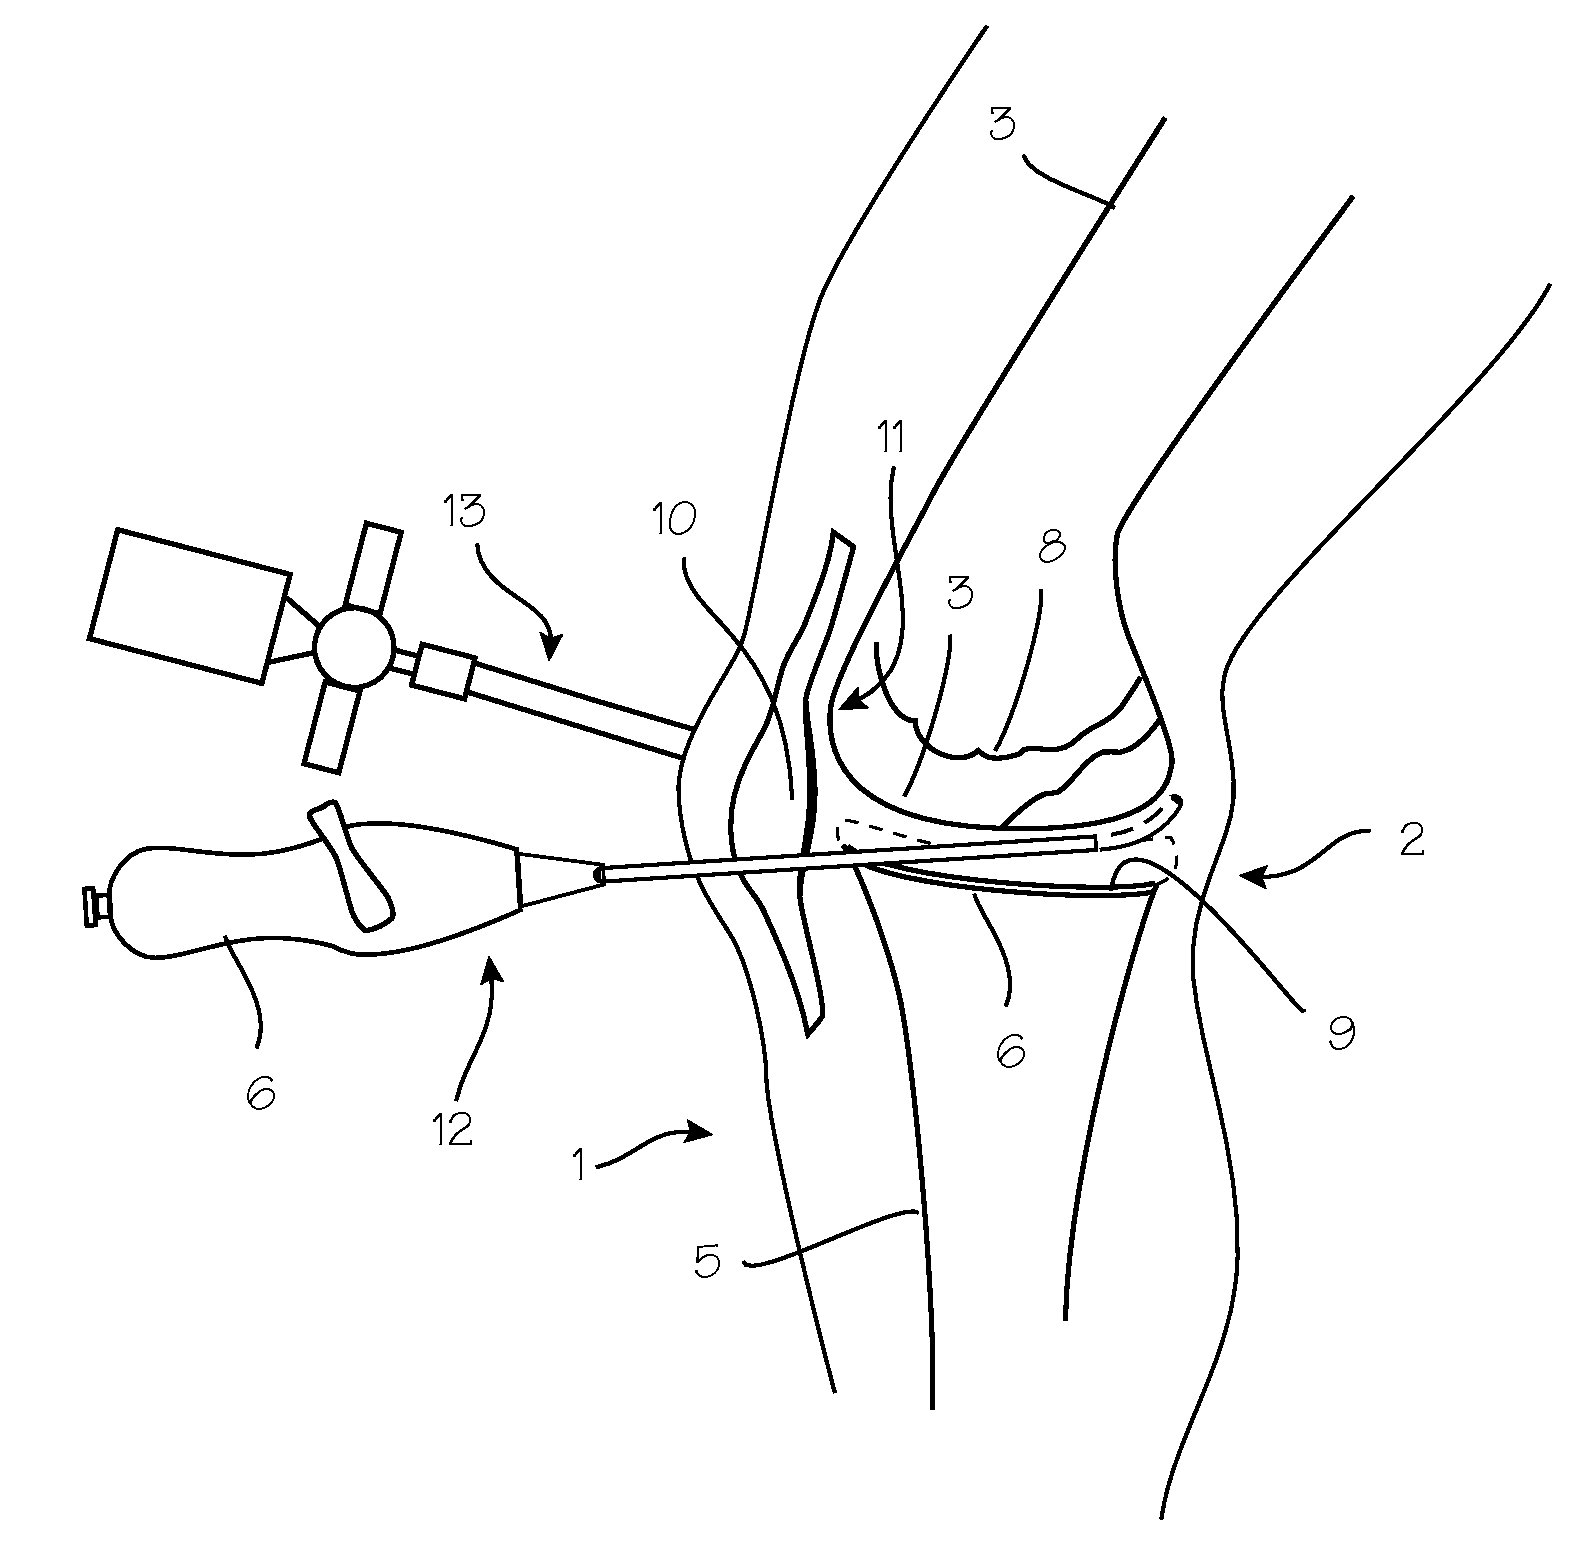 Method and Devices for Treating Damaged Articular Cartilage